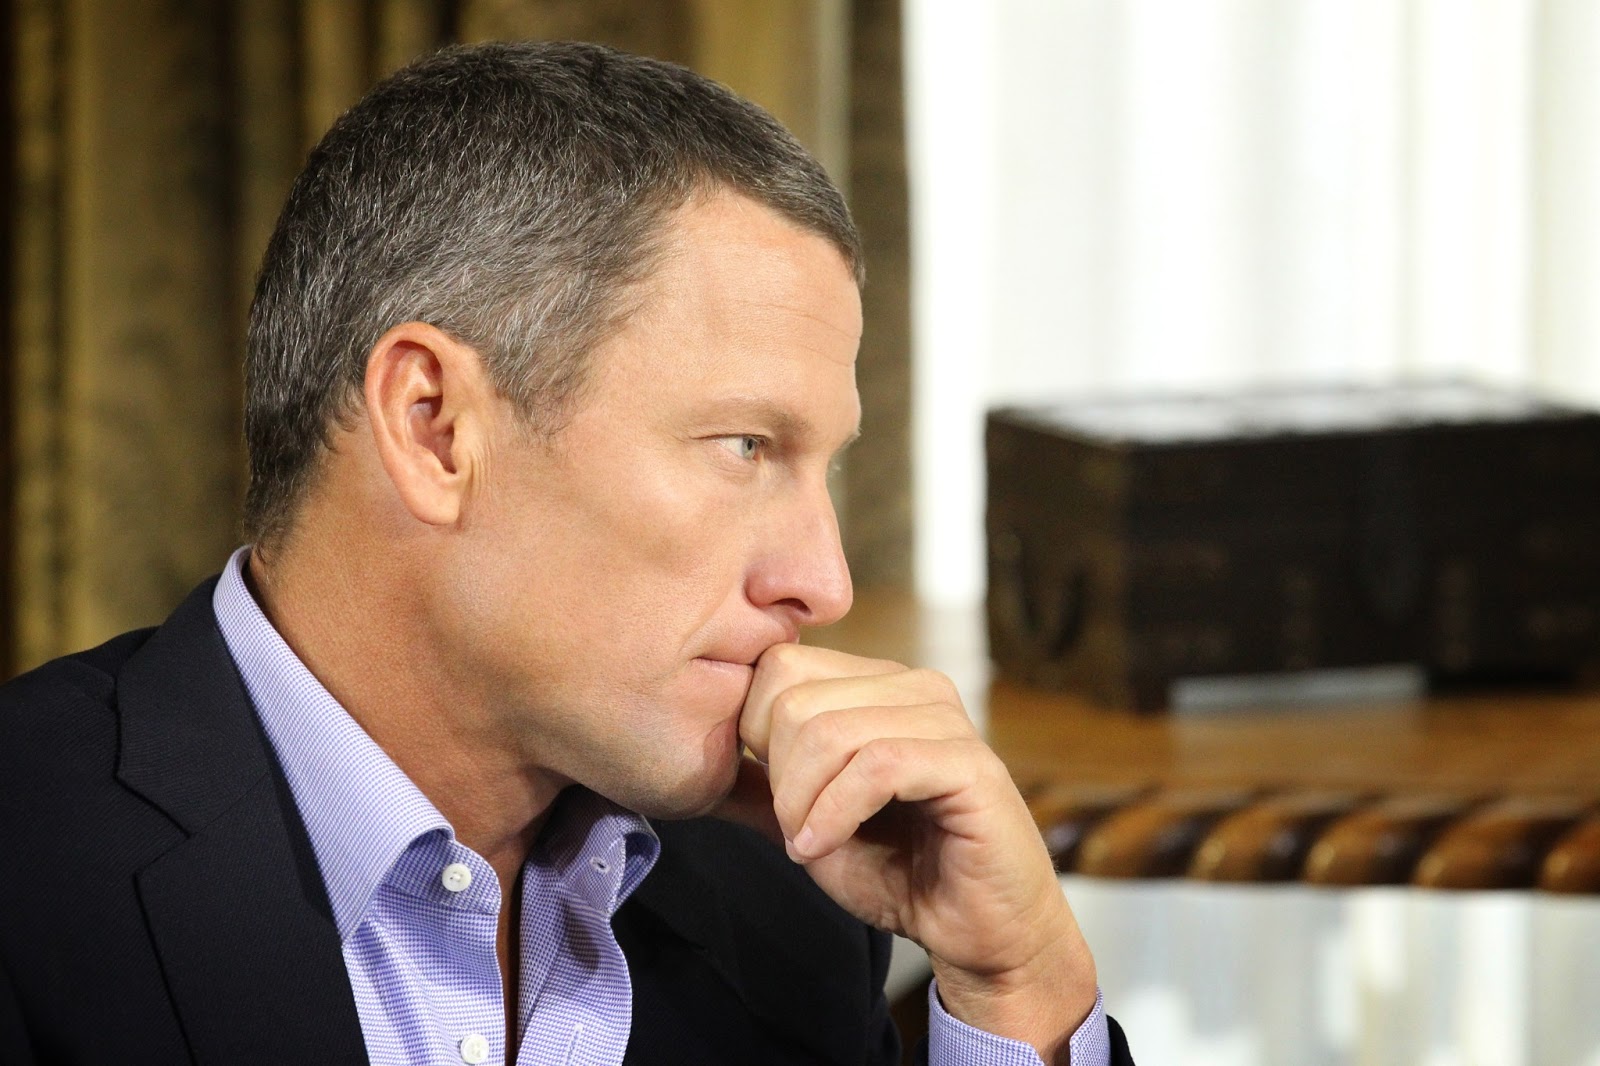 Lance Armstrong has admitted to doping through his Tour de France victories